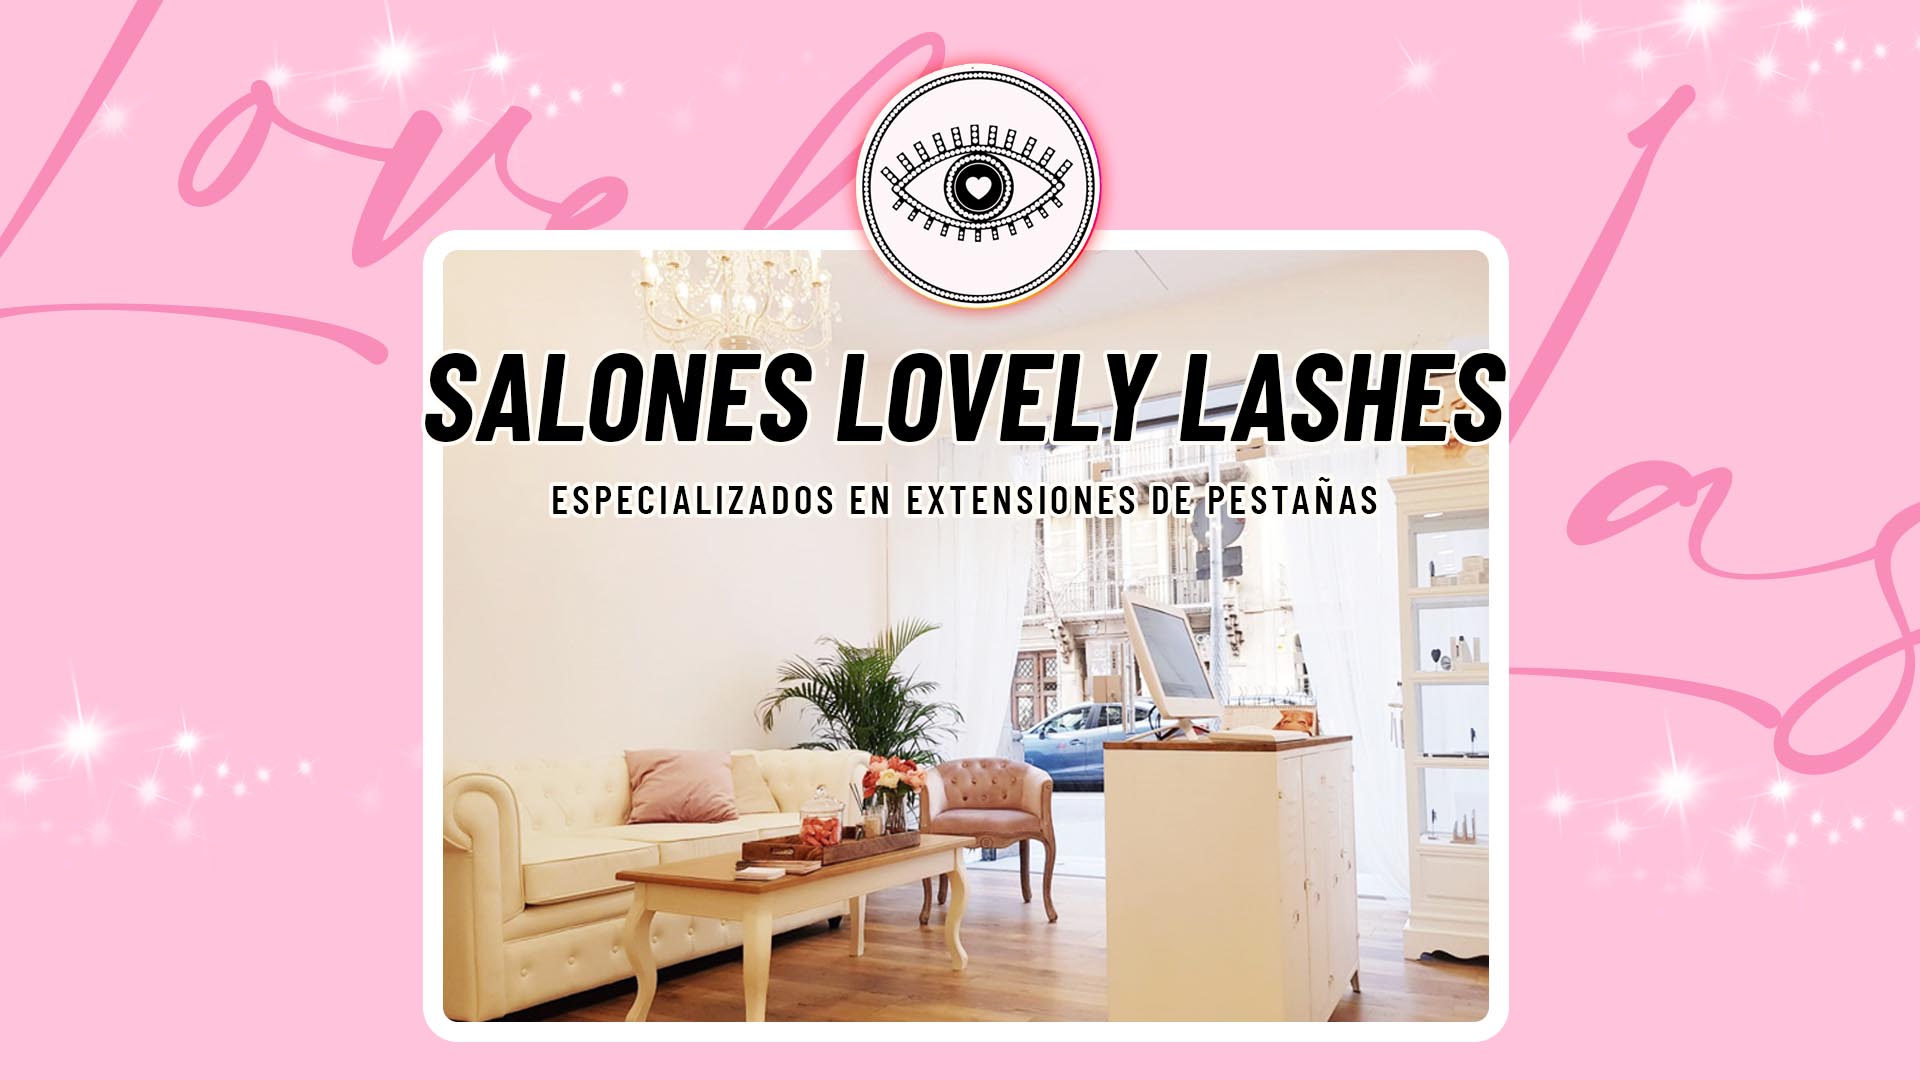 Salones Lovely Lashes